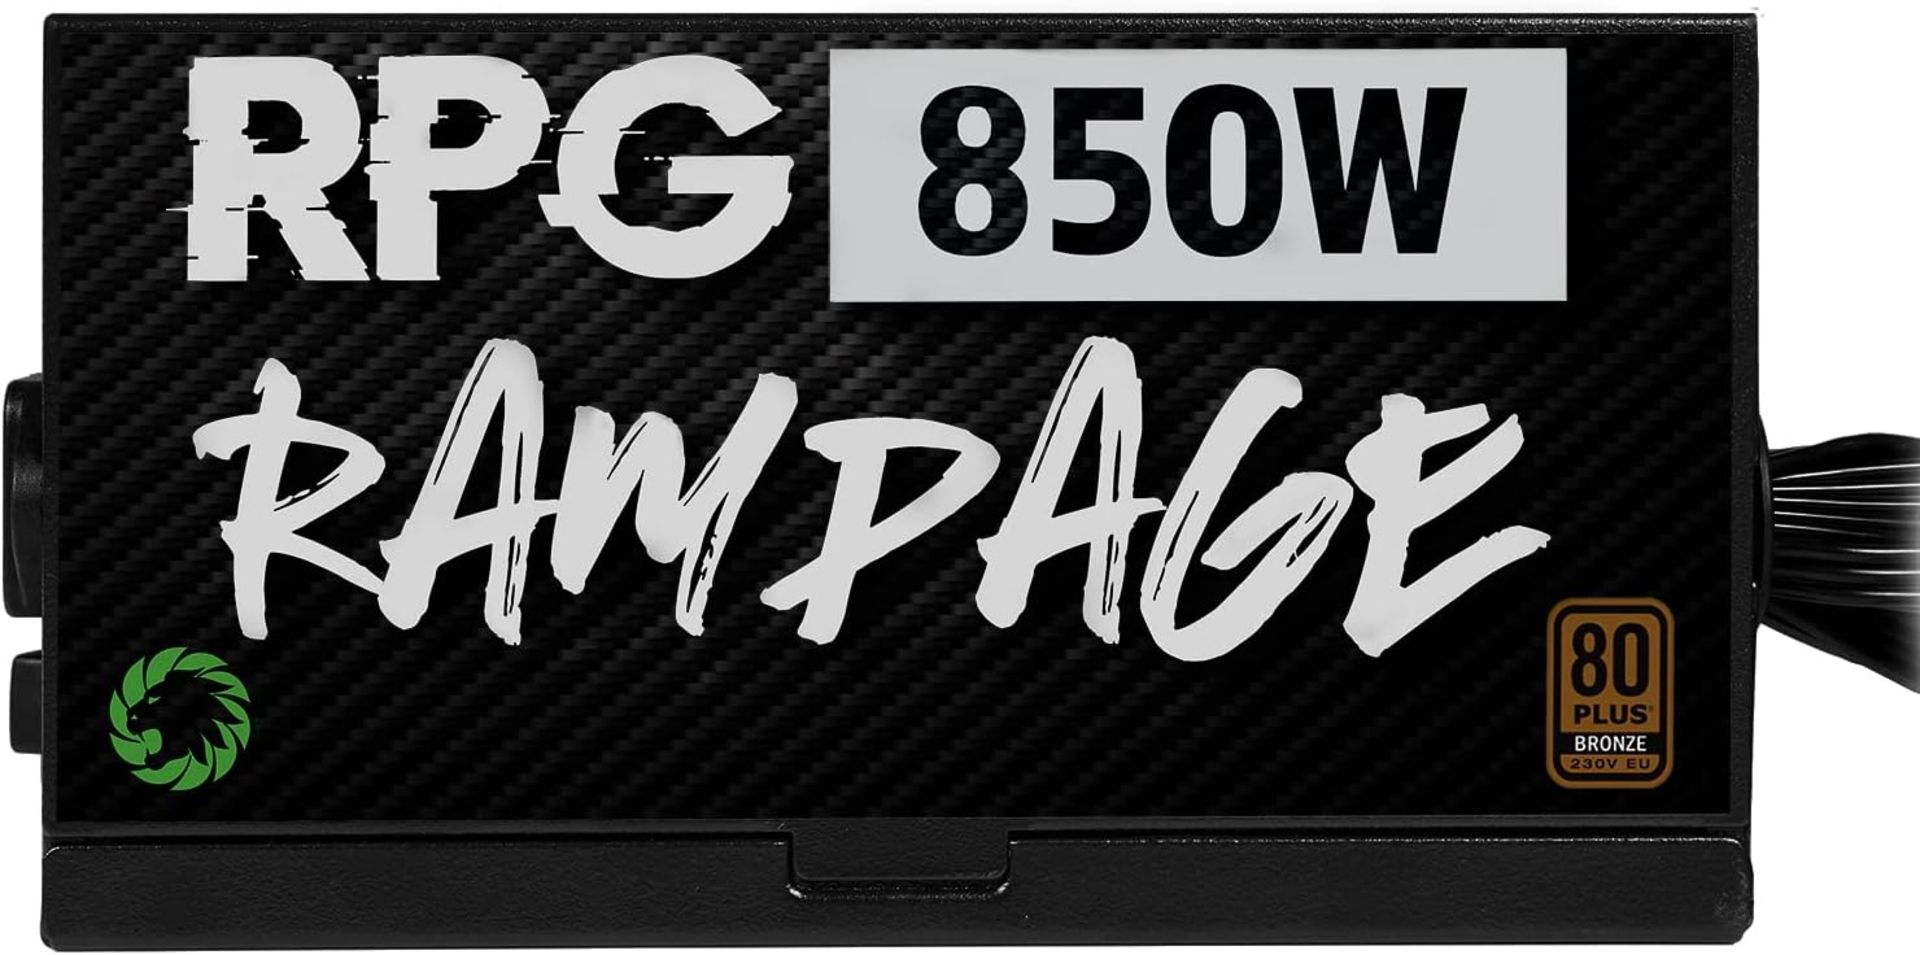 2x NEW & BOXED GAMEMAX Rampage 850w Power Supply. RRP £69.99 EACH. Semi-Modular - The 850W Rampage - Image 10 of 13